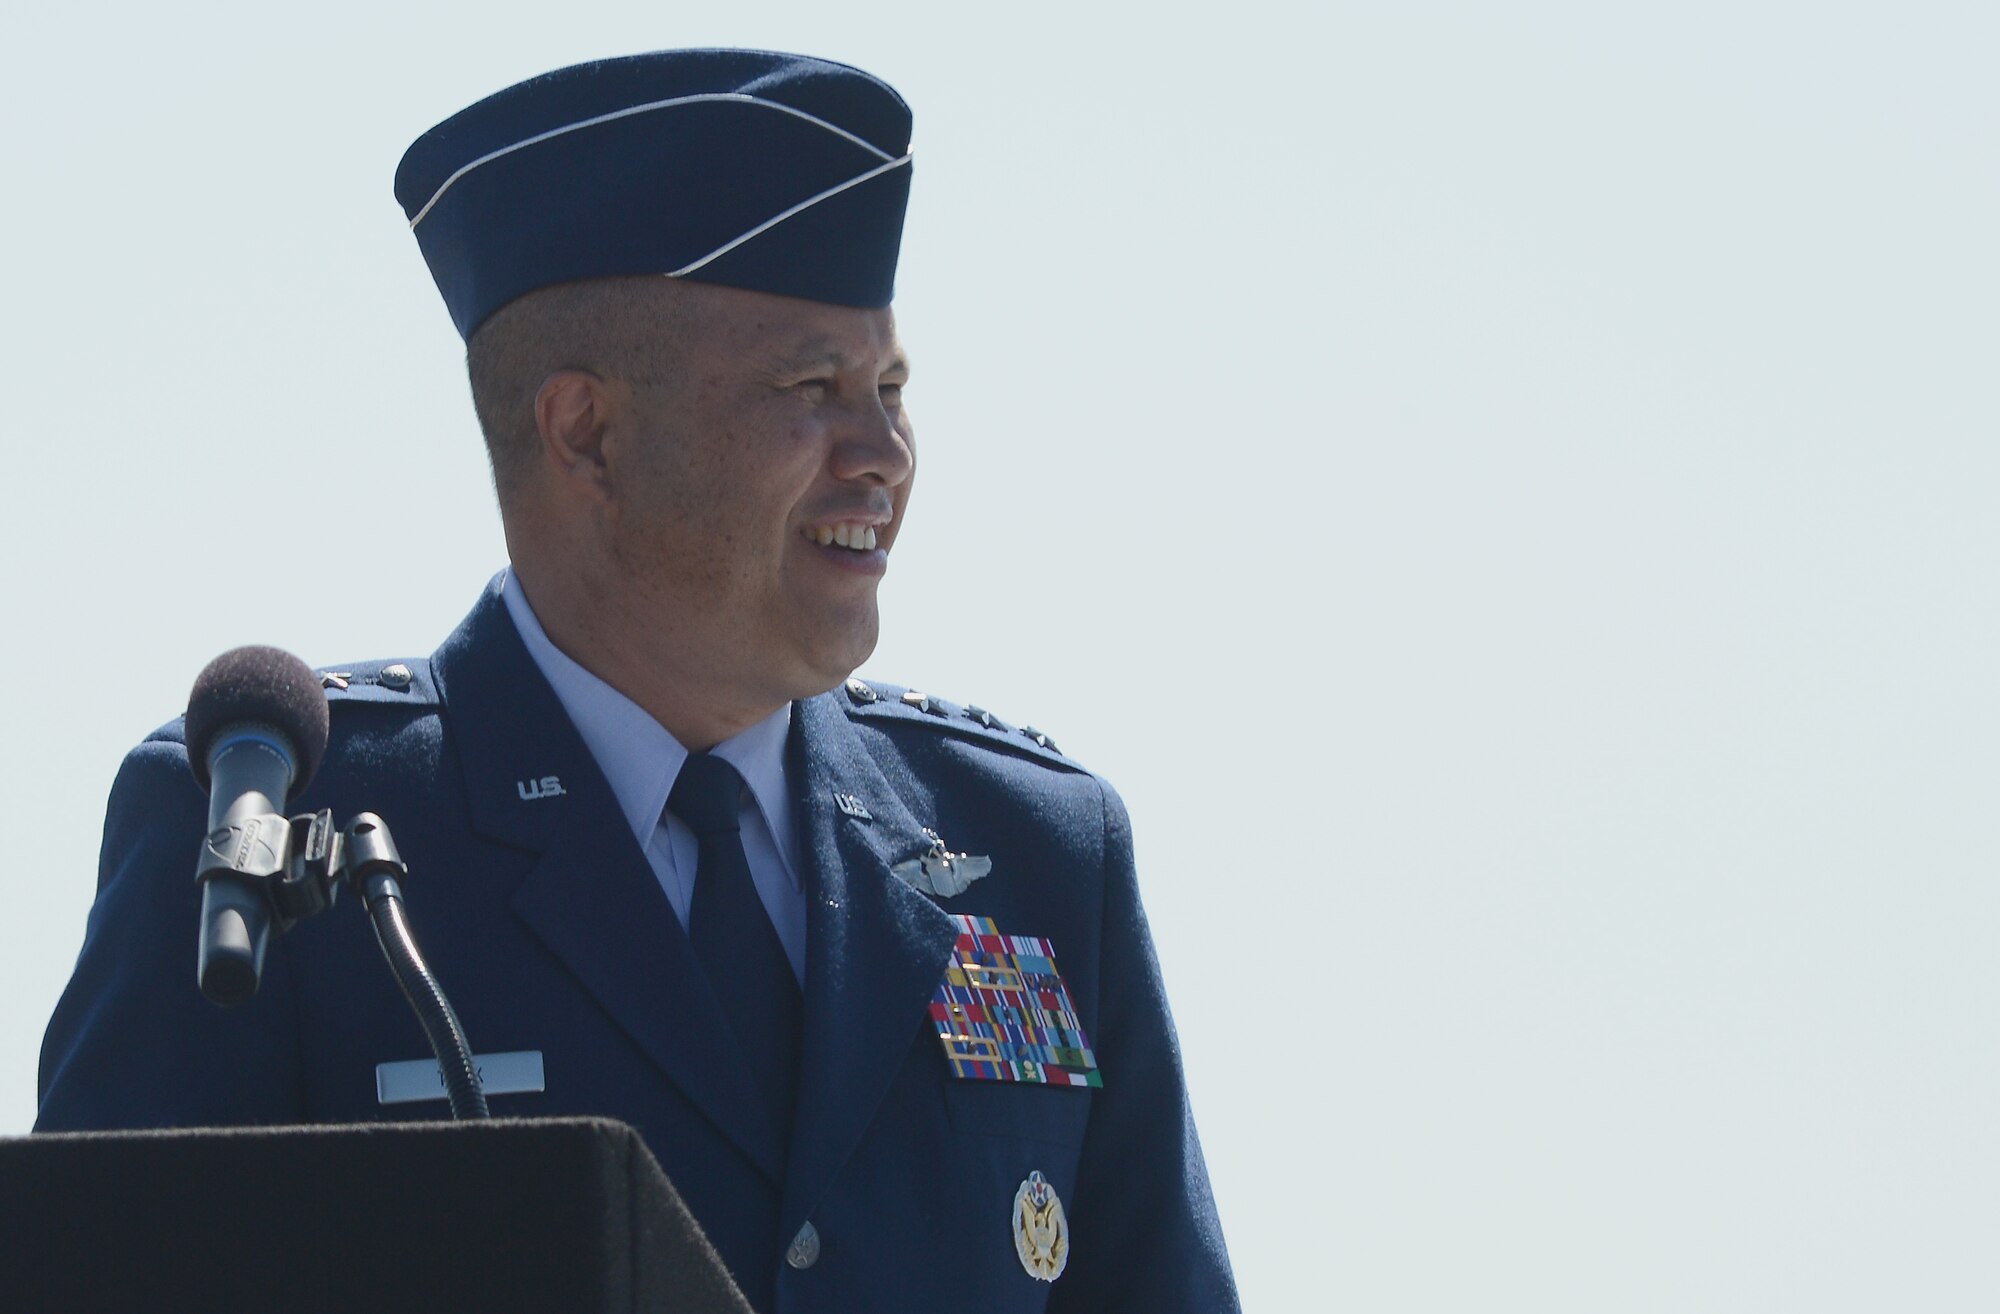 Lt. Gen. Giovanni Tuck, 18th Air Force commander, addresses the audience during a change of command ceremony, July 14, 2017 at Joint Base Lewis-McChord, Wash. As 18th AF commander, Tuck is responsible for the command's worldwide operational mission of providing rapid global mobility and sustainment for America's armed forces through airlift, aerial refueling, aeromedical evacuation and contingency response. (U.S. Air Force photo/Staff Sgt. Divine Cox)